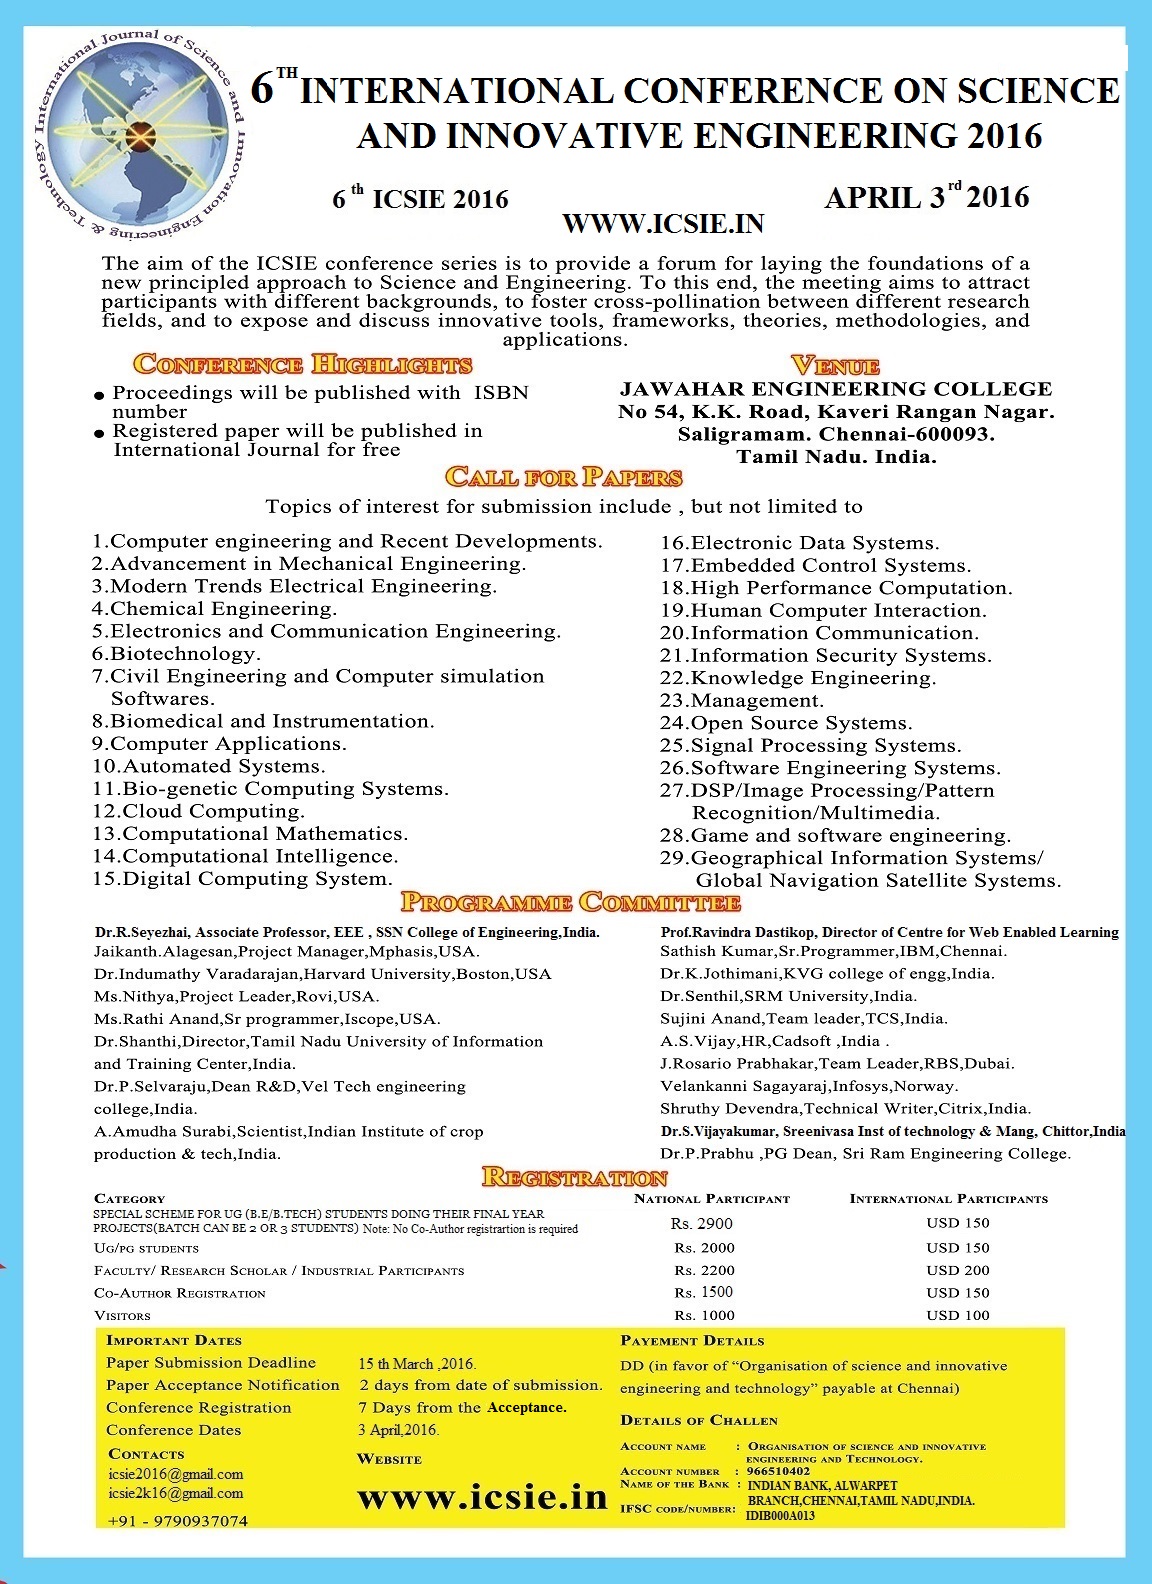 6th International Conference On Science And Innovative Engineering 2016 (6 ICSIE 2016), Chennai, Tamil Nadu, India